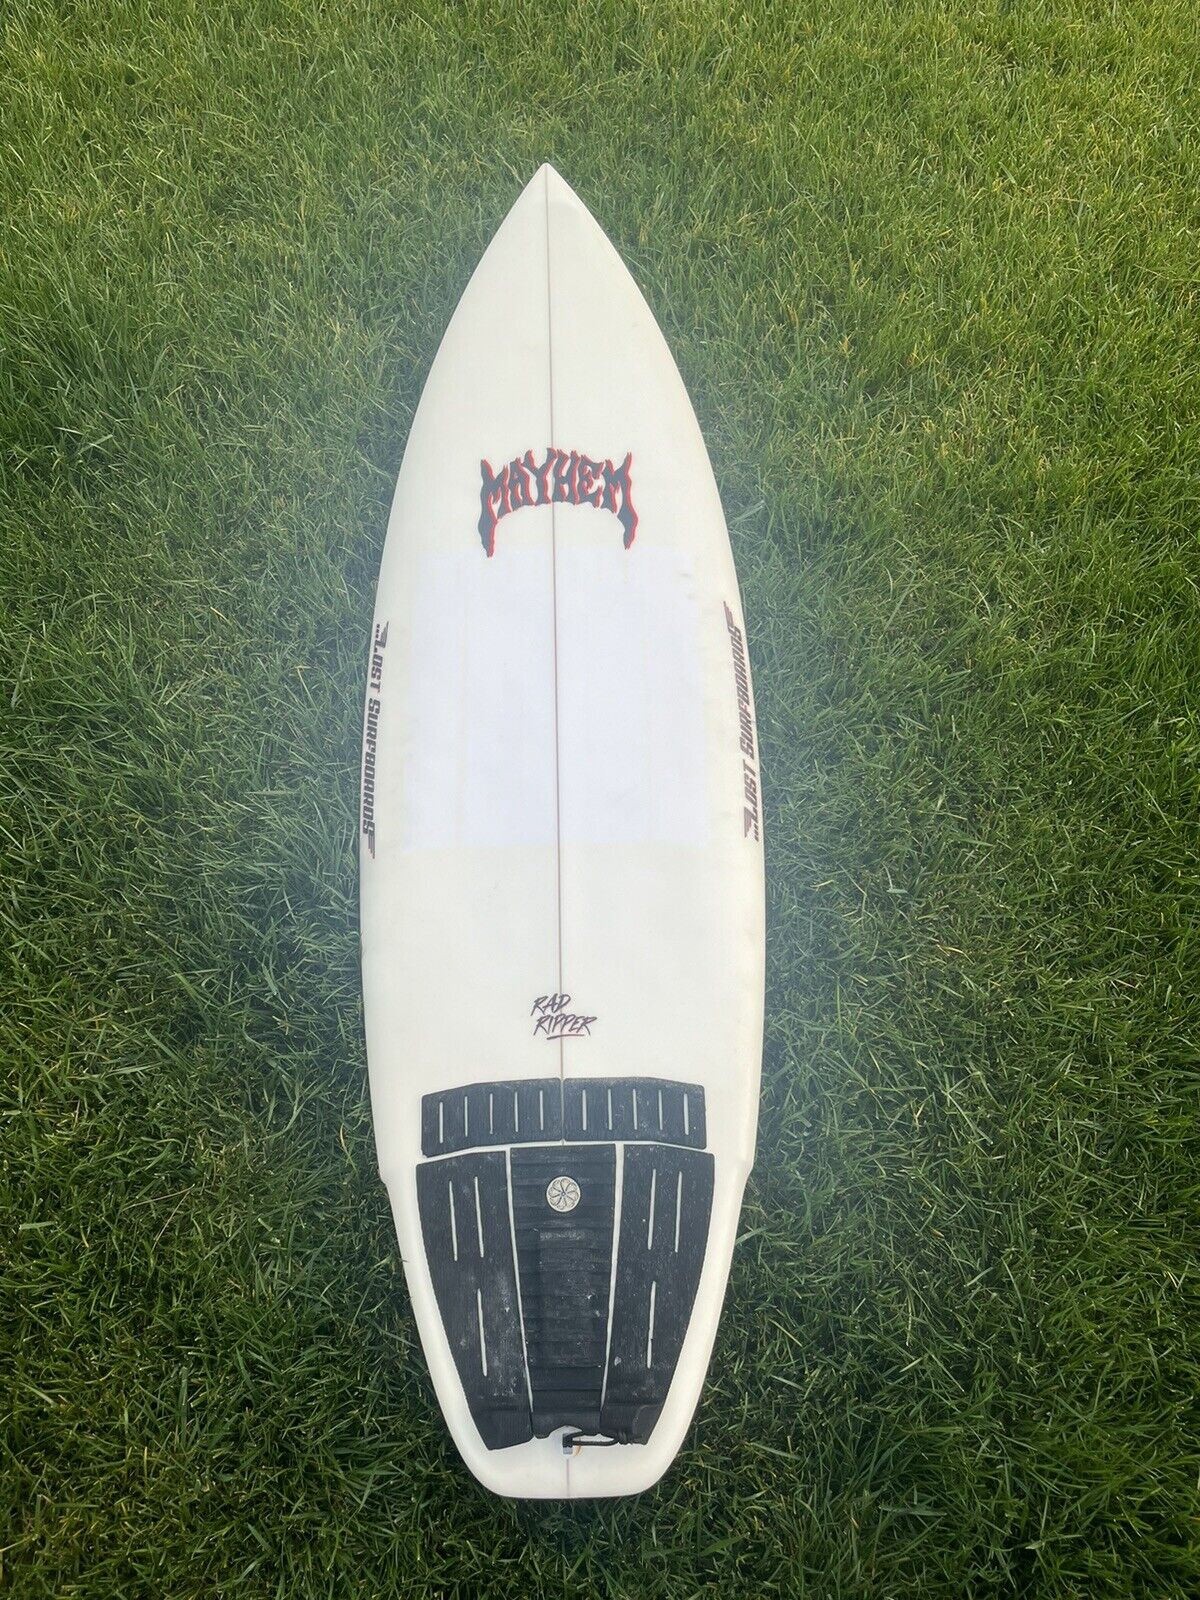 Lost Rad Ripper used, Size 5.10  Volume 30.5L, really good conditions.